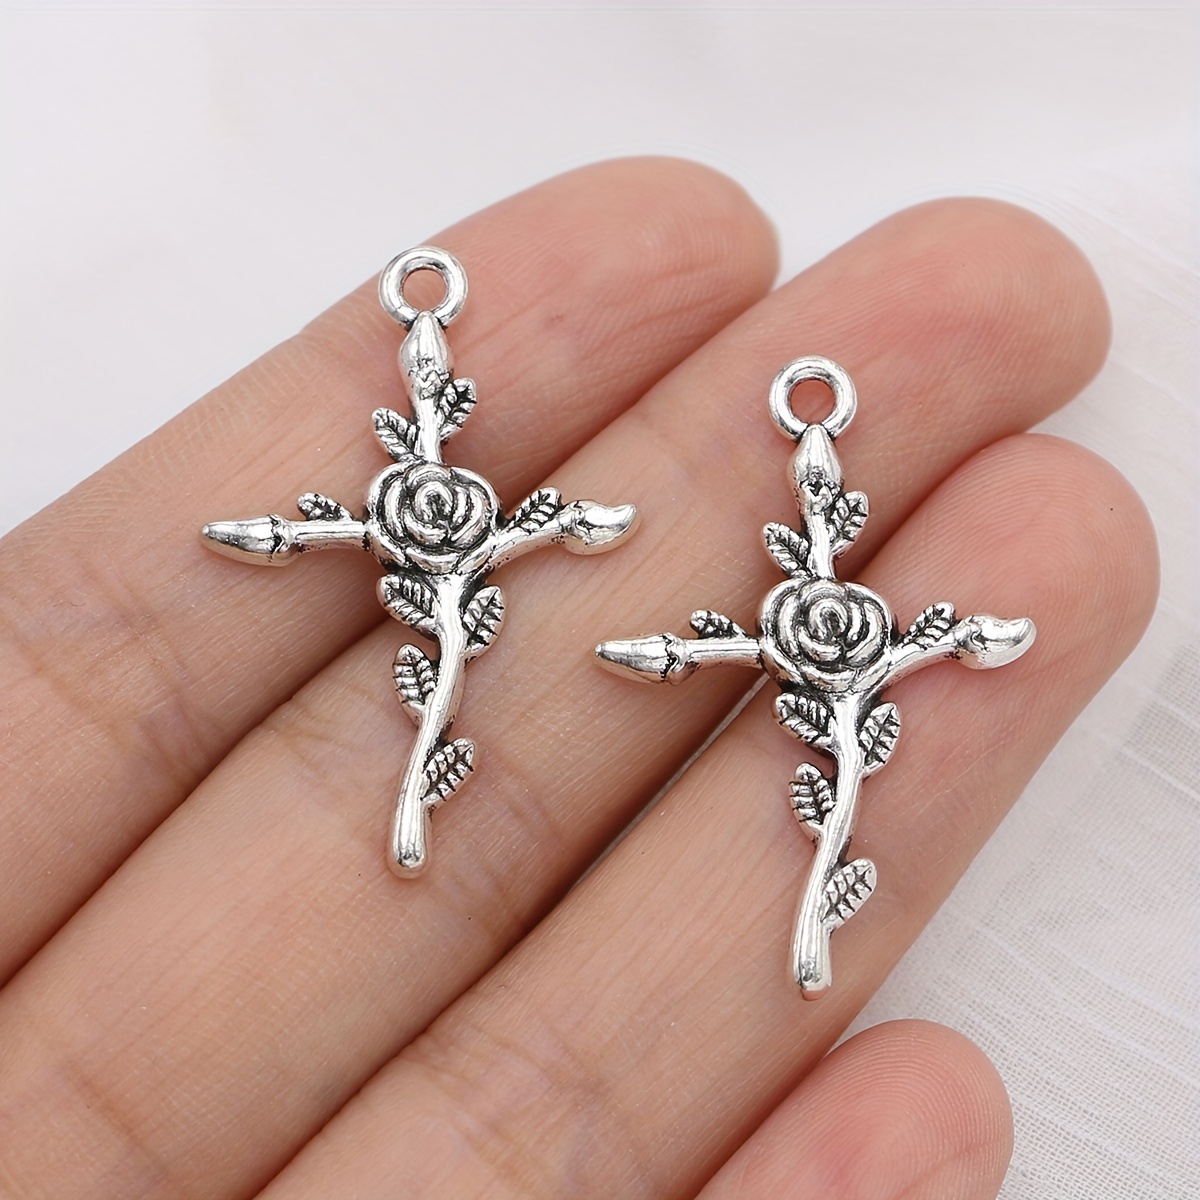 Antique Silver Plated Flower Cross Charms Rose Cross Pendants For